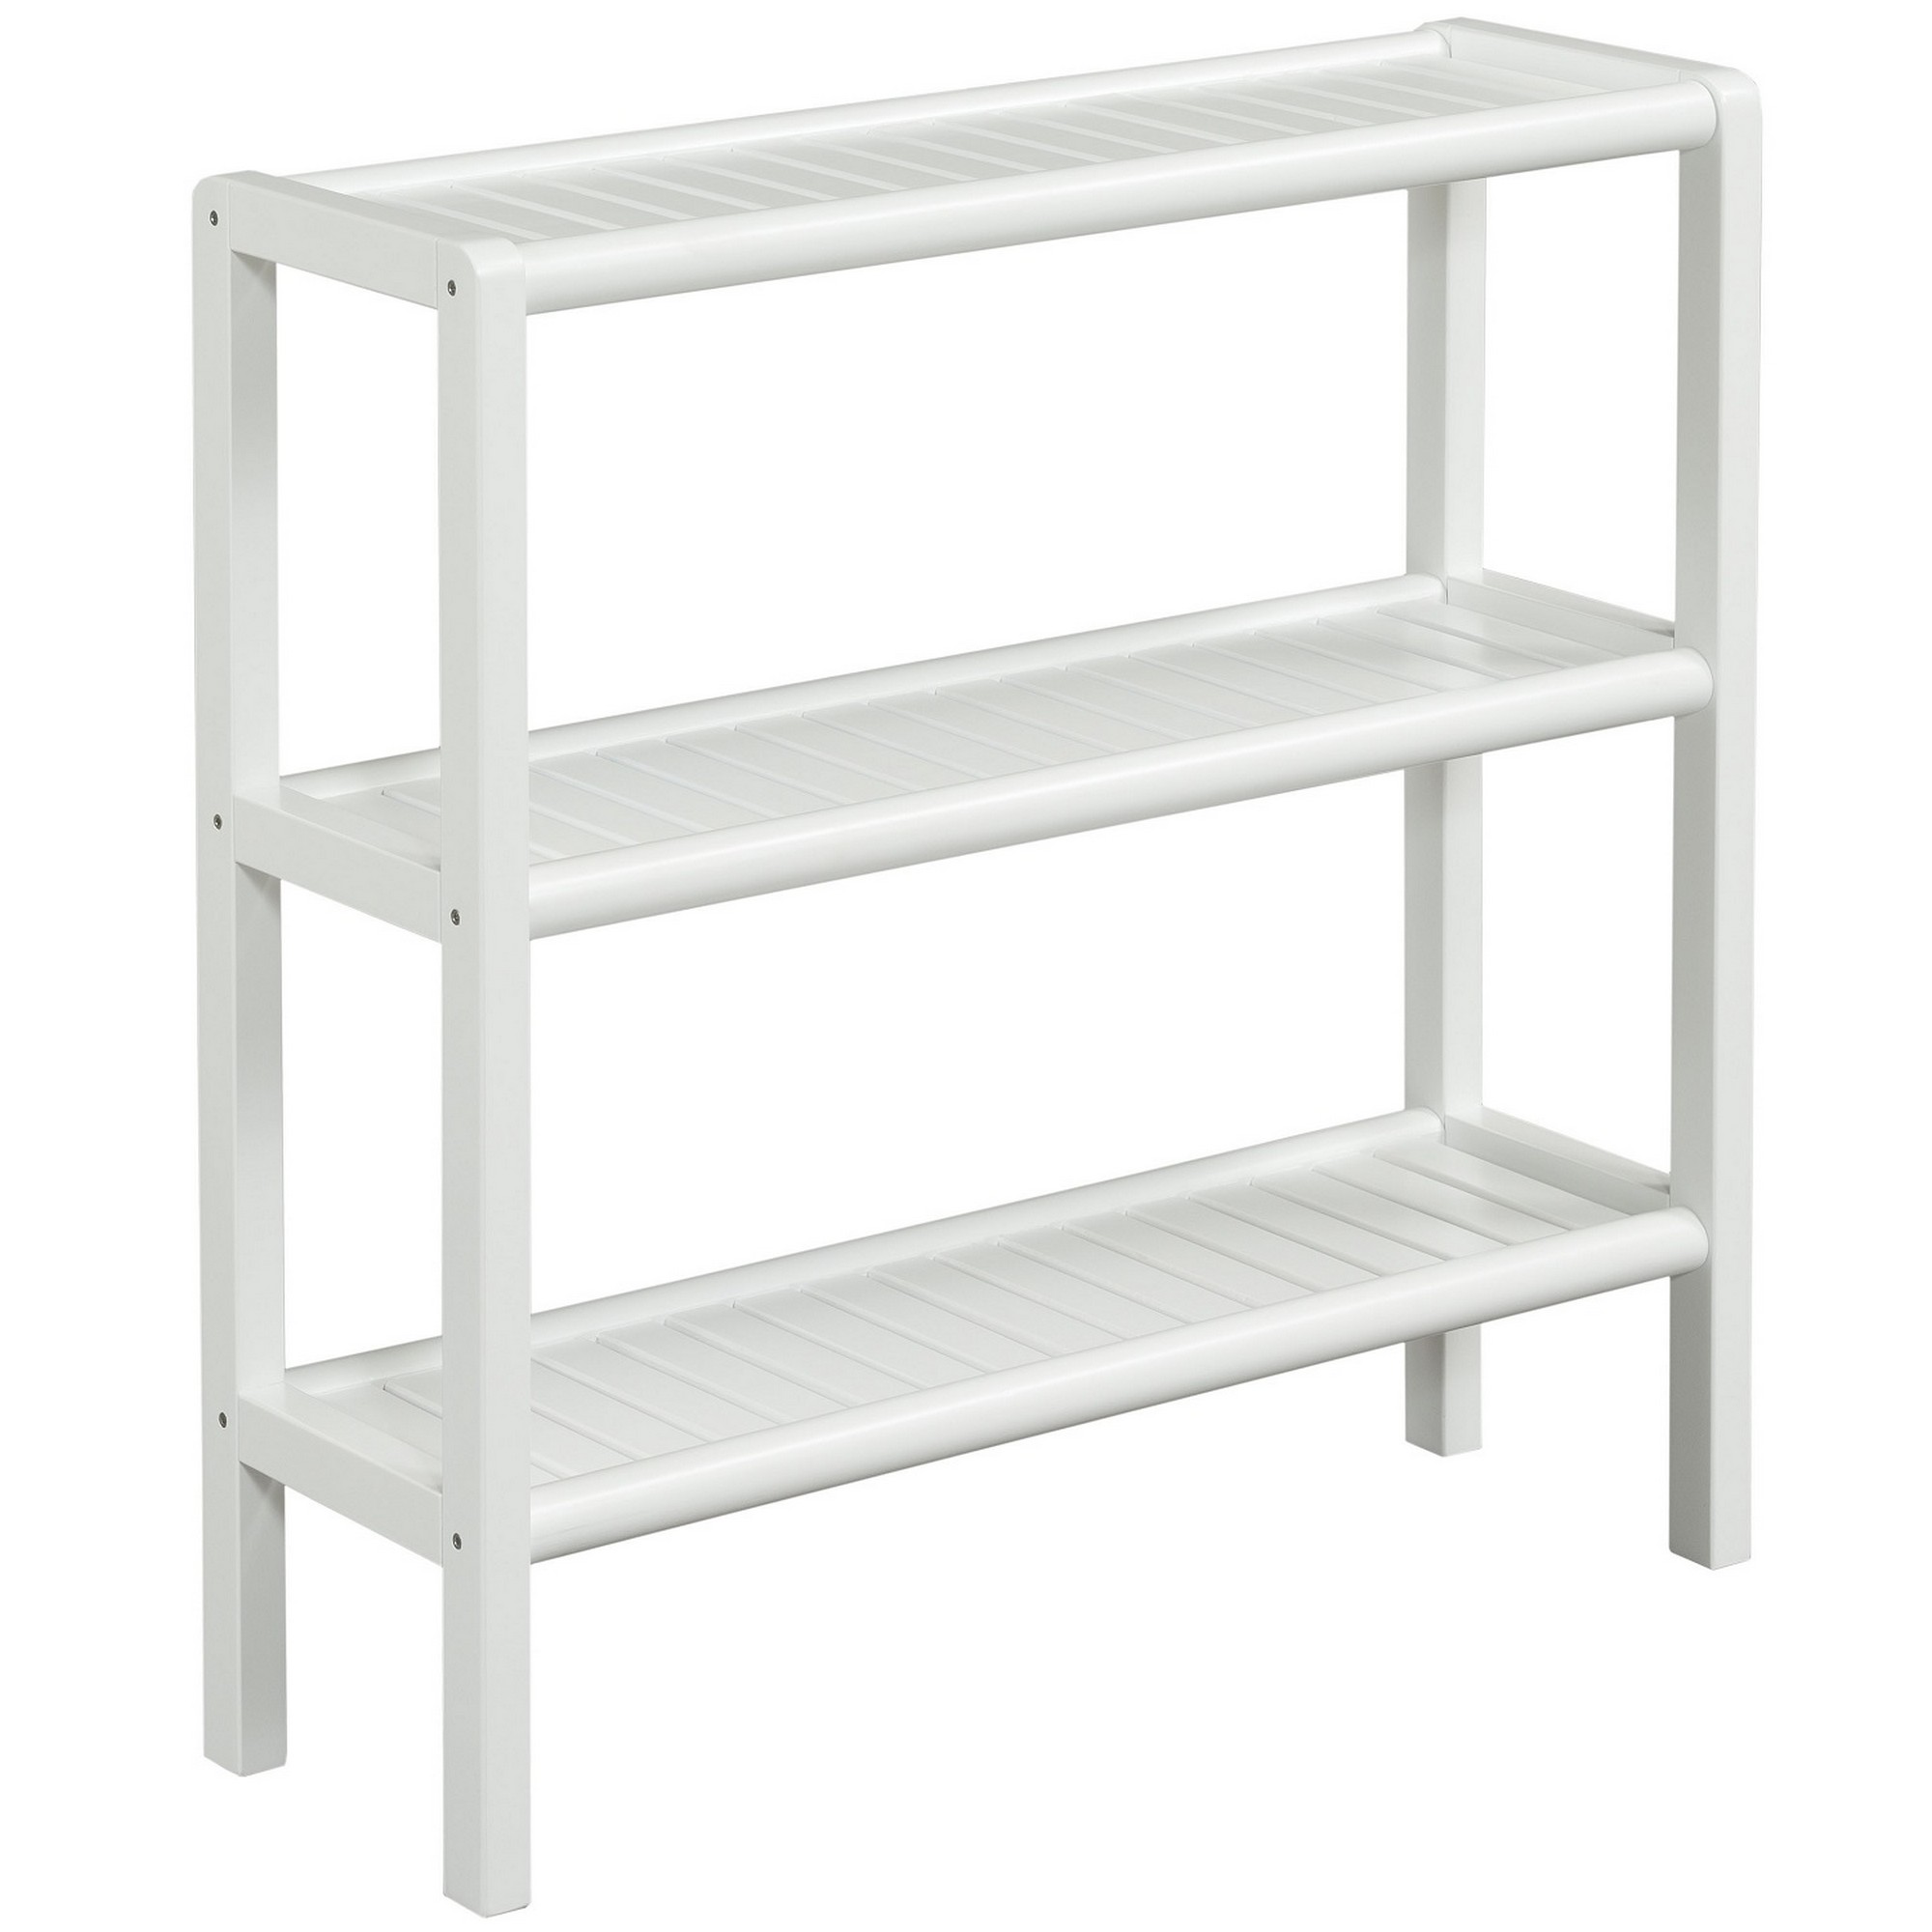 29" Bookcase with 3 Shelves in White